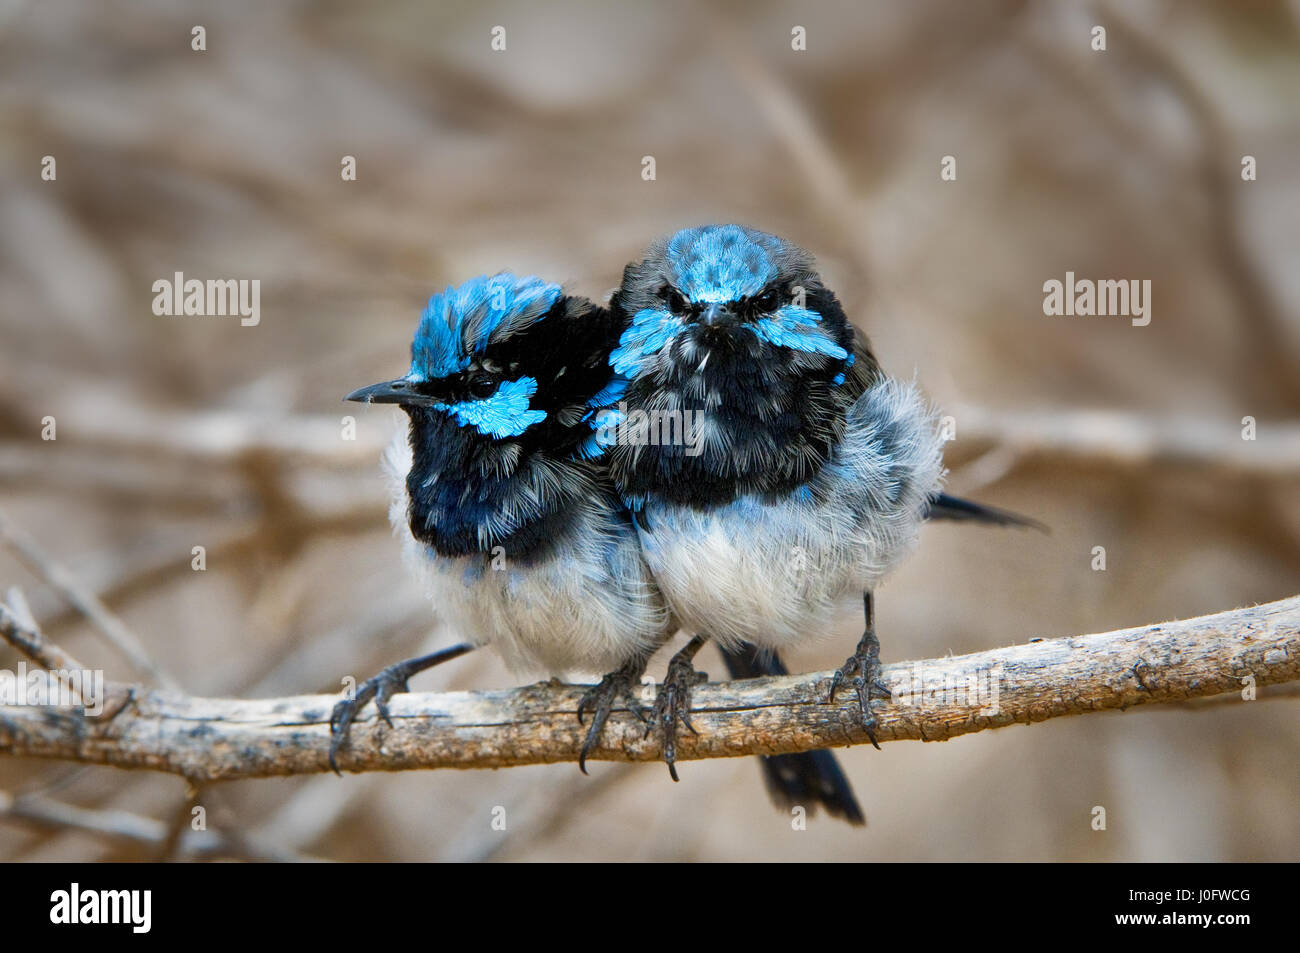 Two Superb Fairy-wrens sitting on a twig. Stock Photo